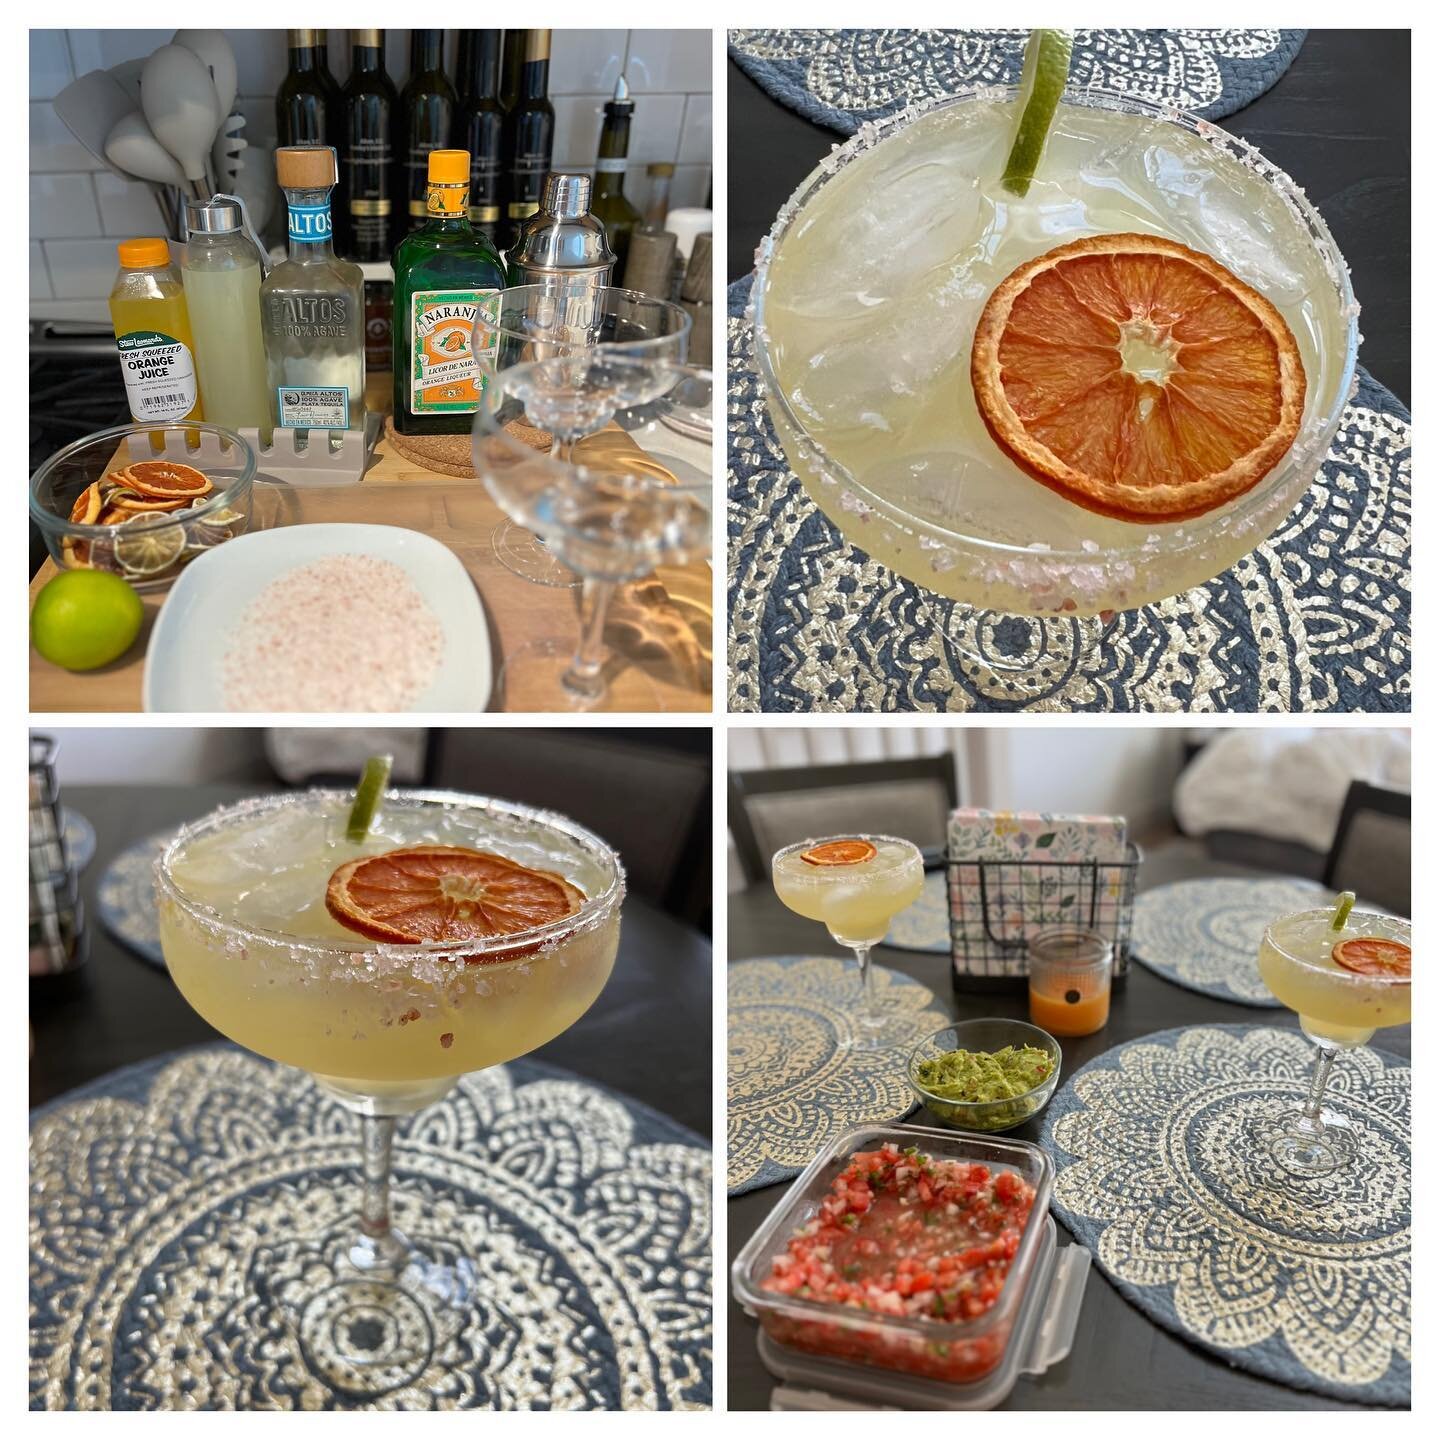 Happy Cinco!
#CincodeMayo fun with the hubby. I cooked us a yummy dinner. Our margaritas not only looked fabulous with dehydrated oranges and limes but they tasted delicious too! No premade mixes here. 
I always do fresh squeezed everything so they h